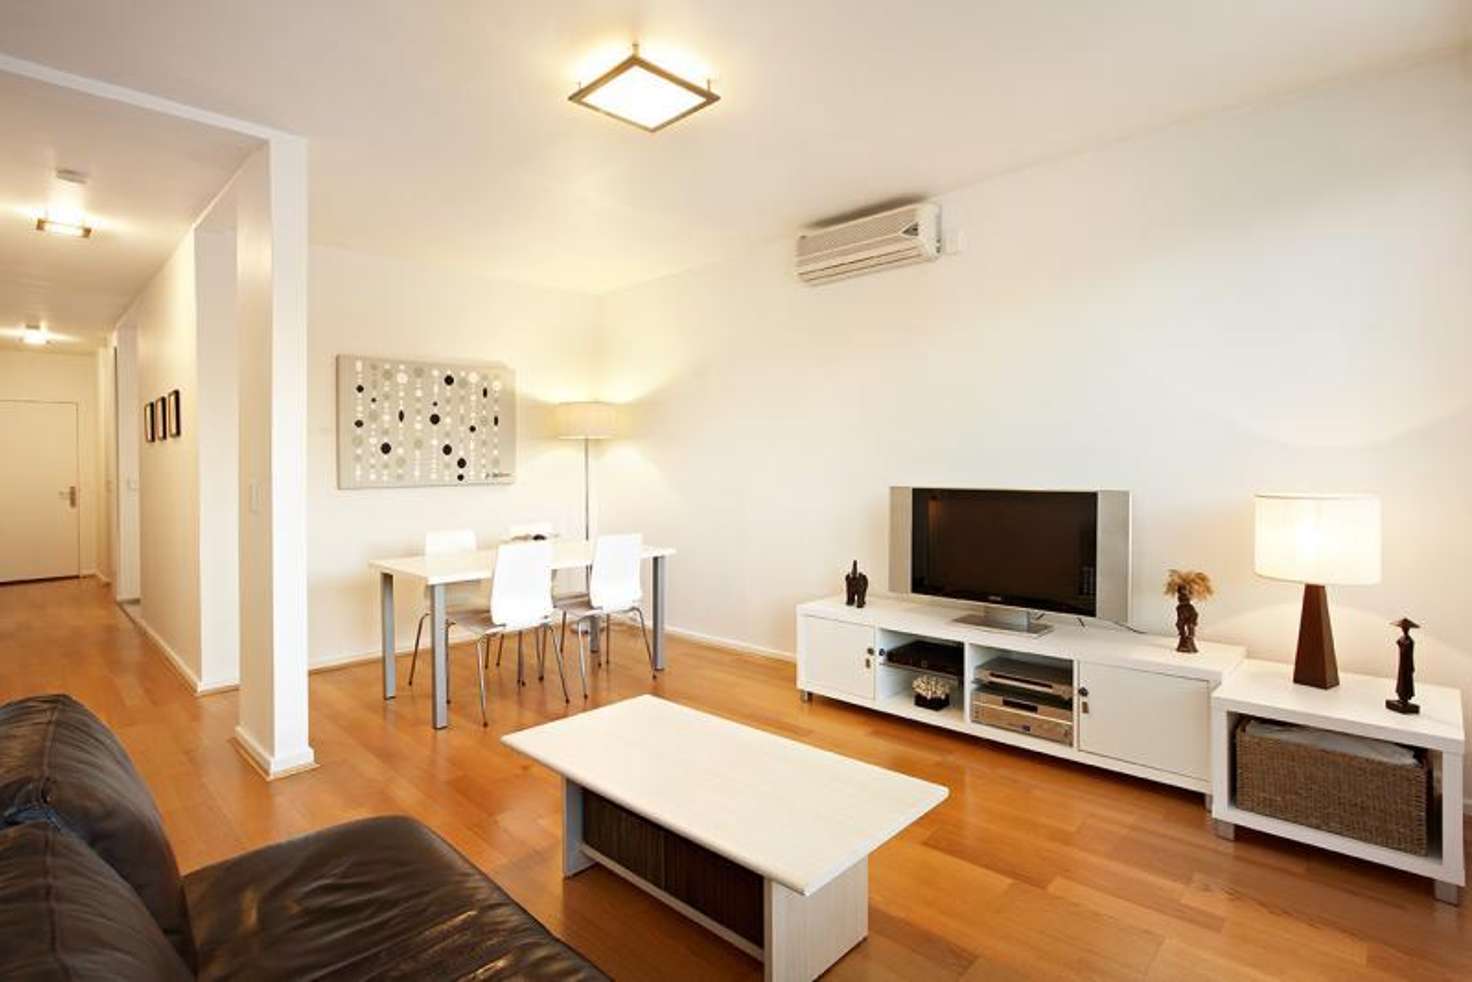 Main view of Homely apartment listing, 4/107 Grosvenor Street, St Kilda East VIC 3183